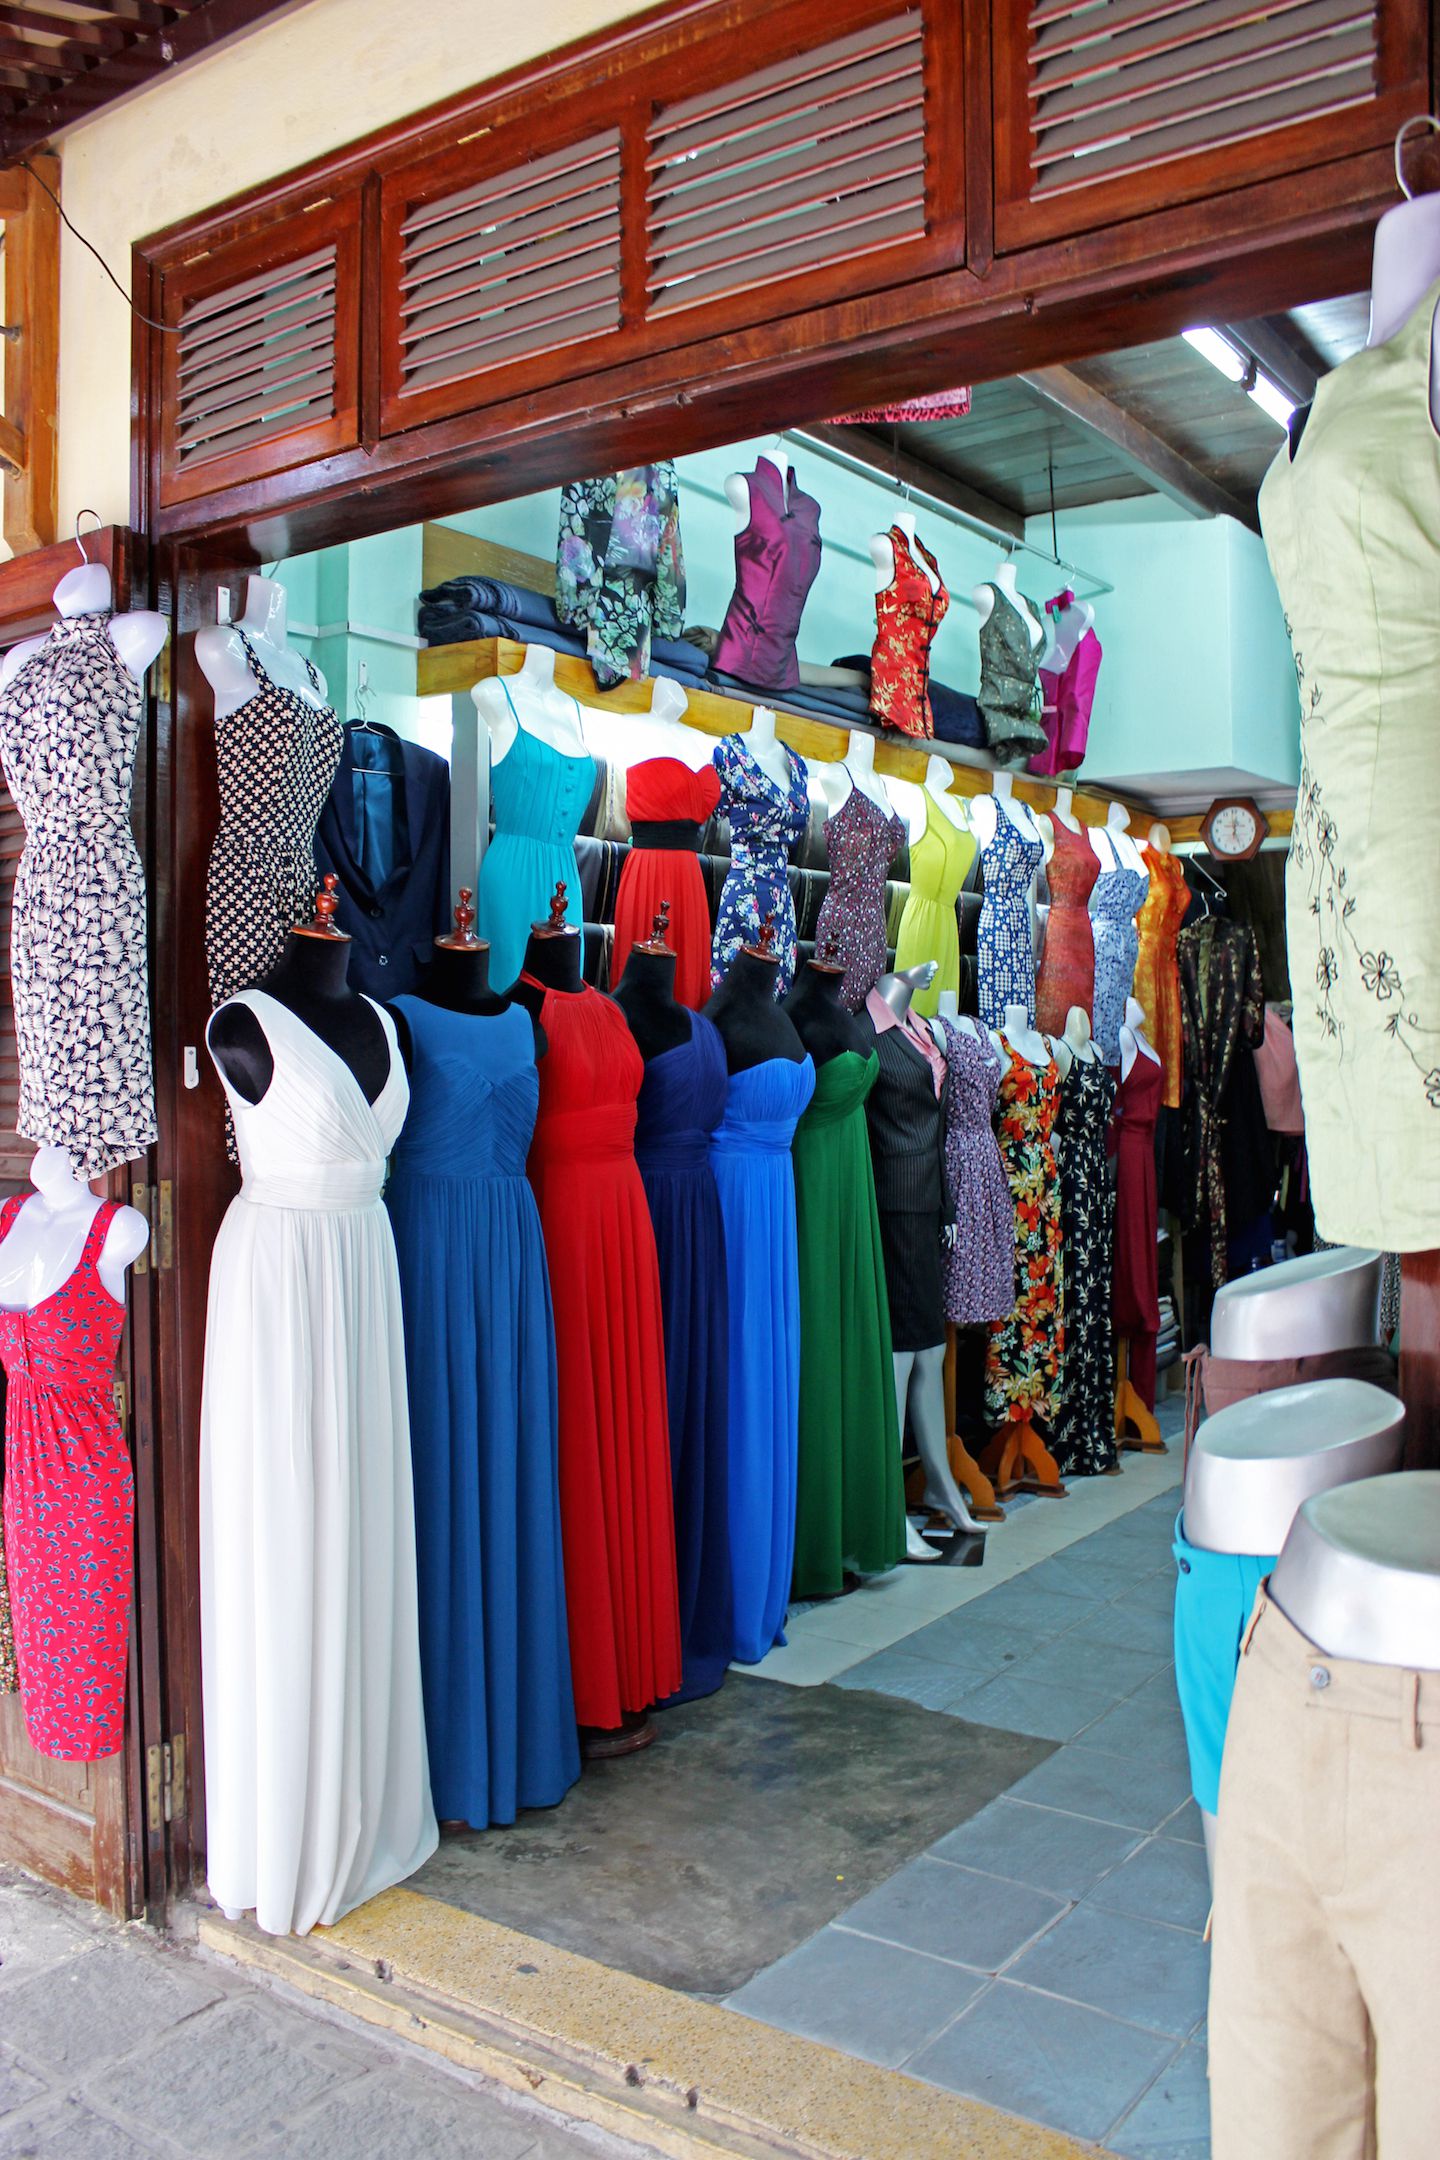 There are countless tailor shops to choose from!